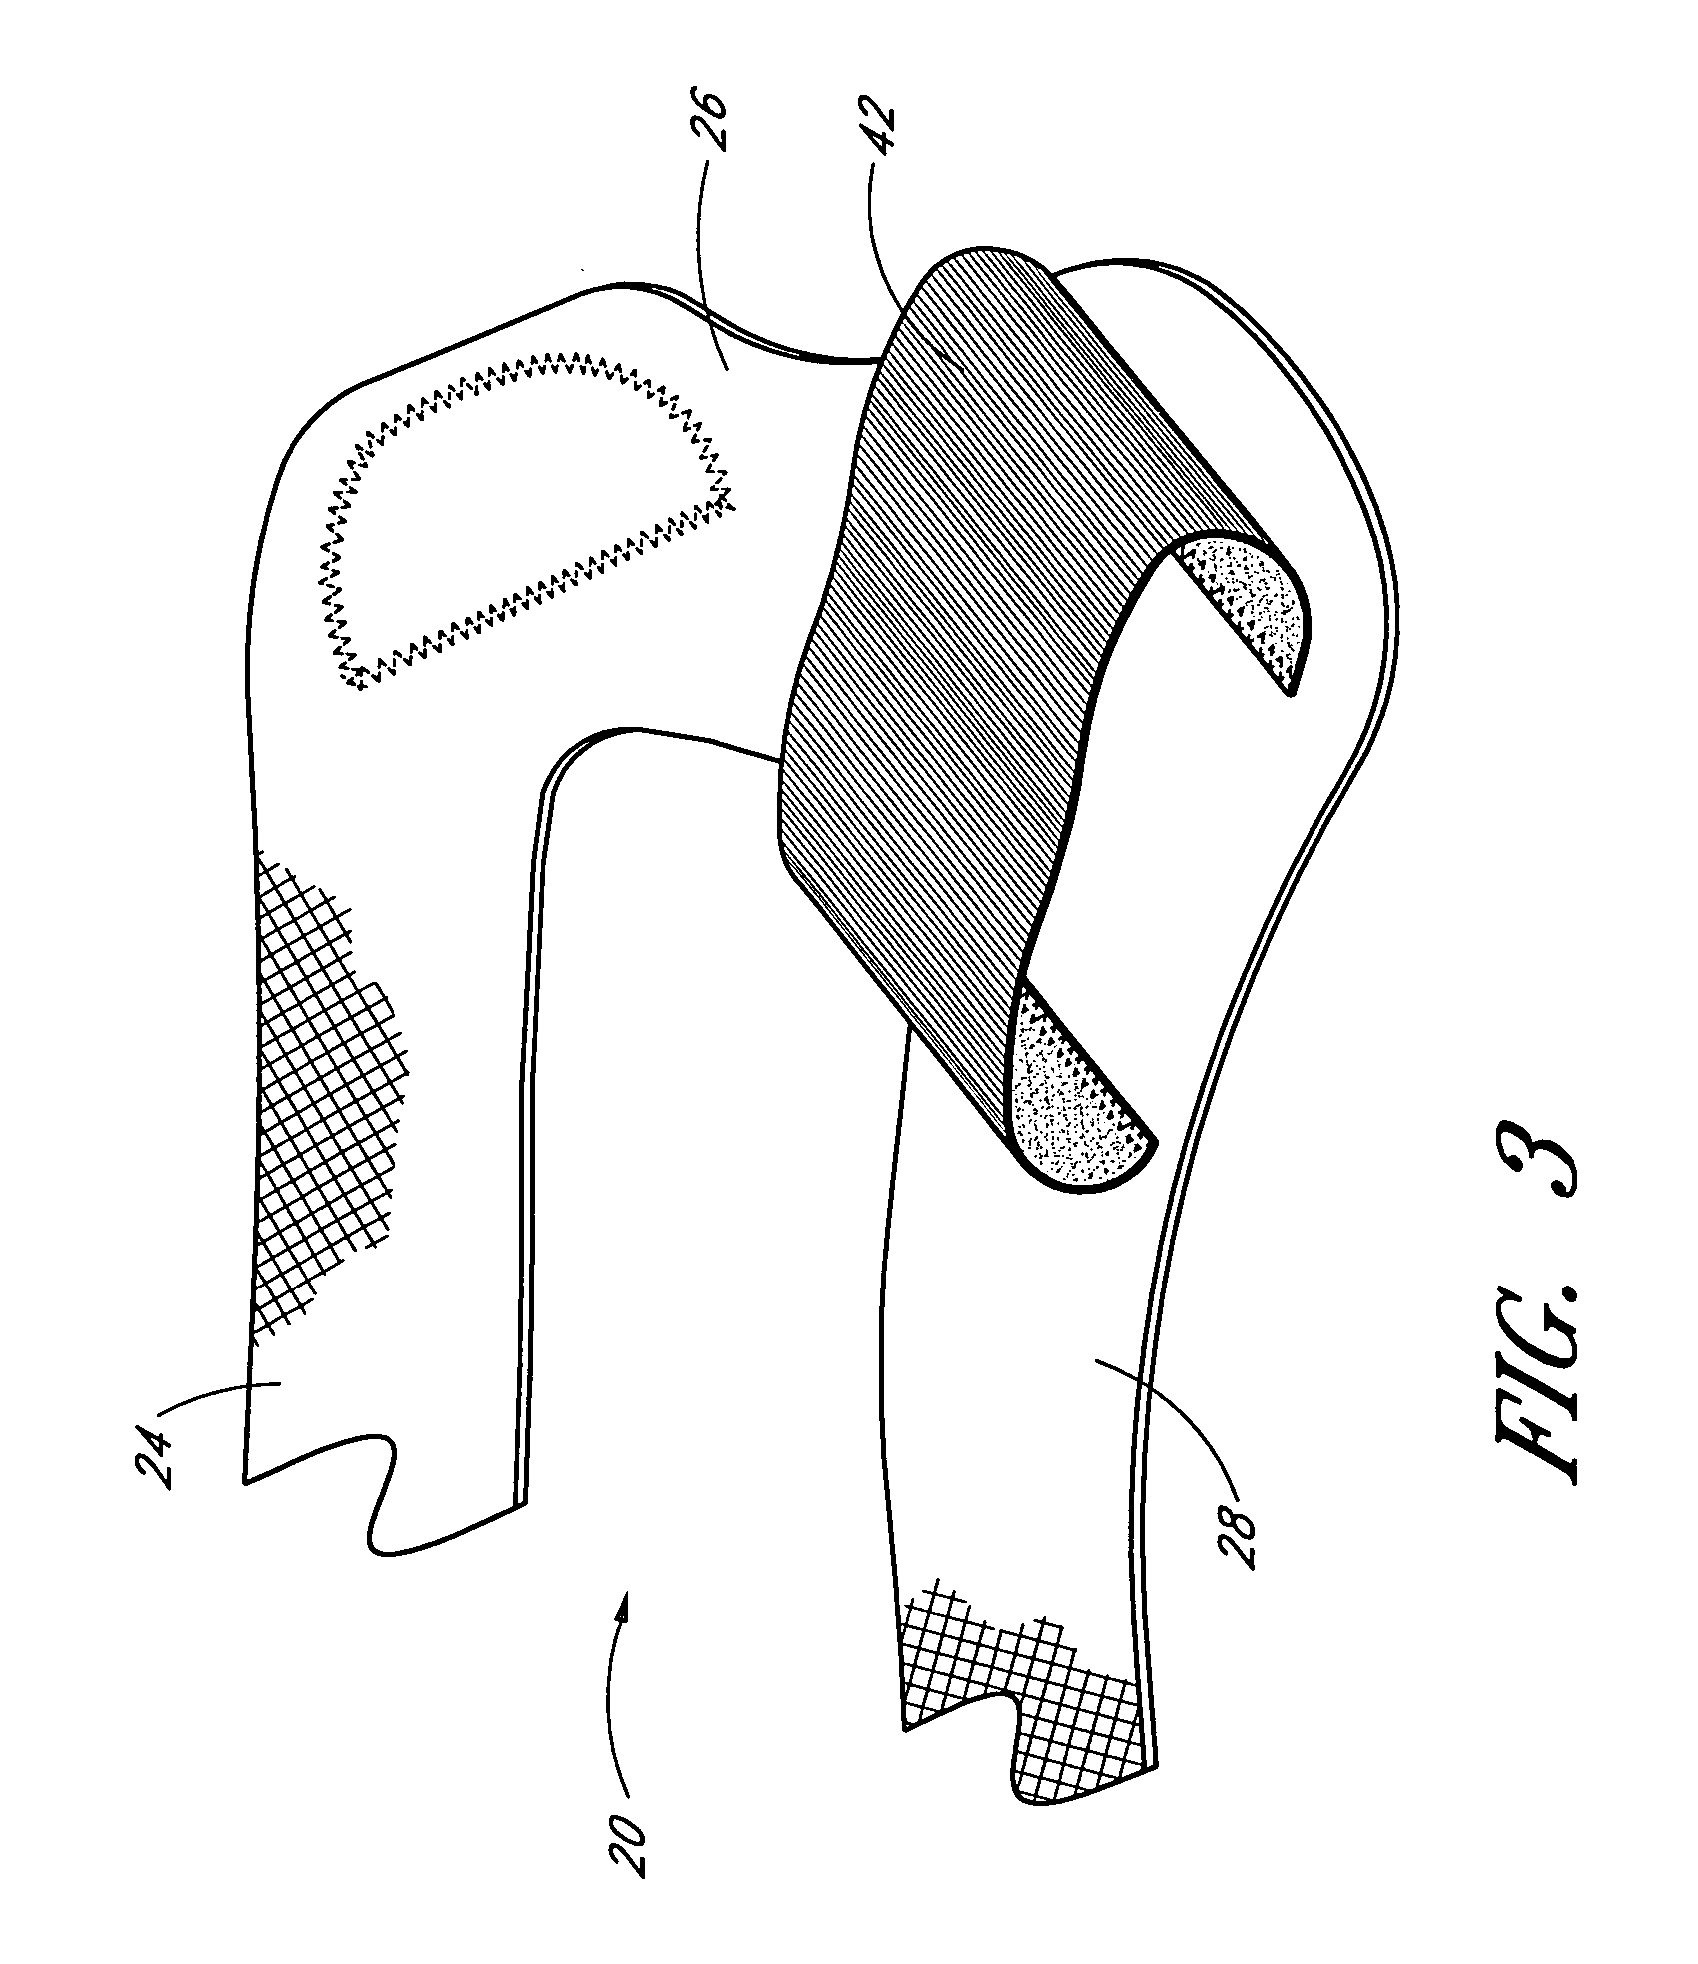 Device and method for externally rotating the femur